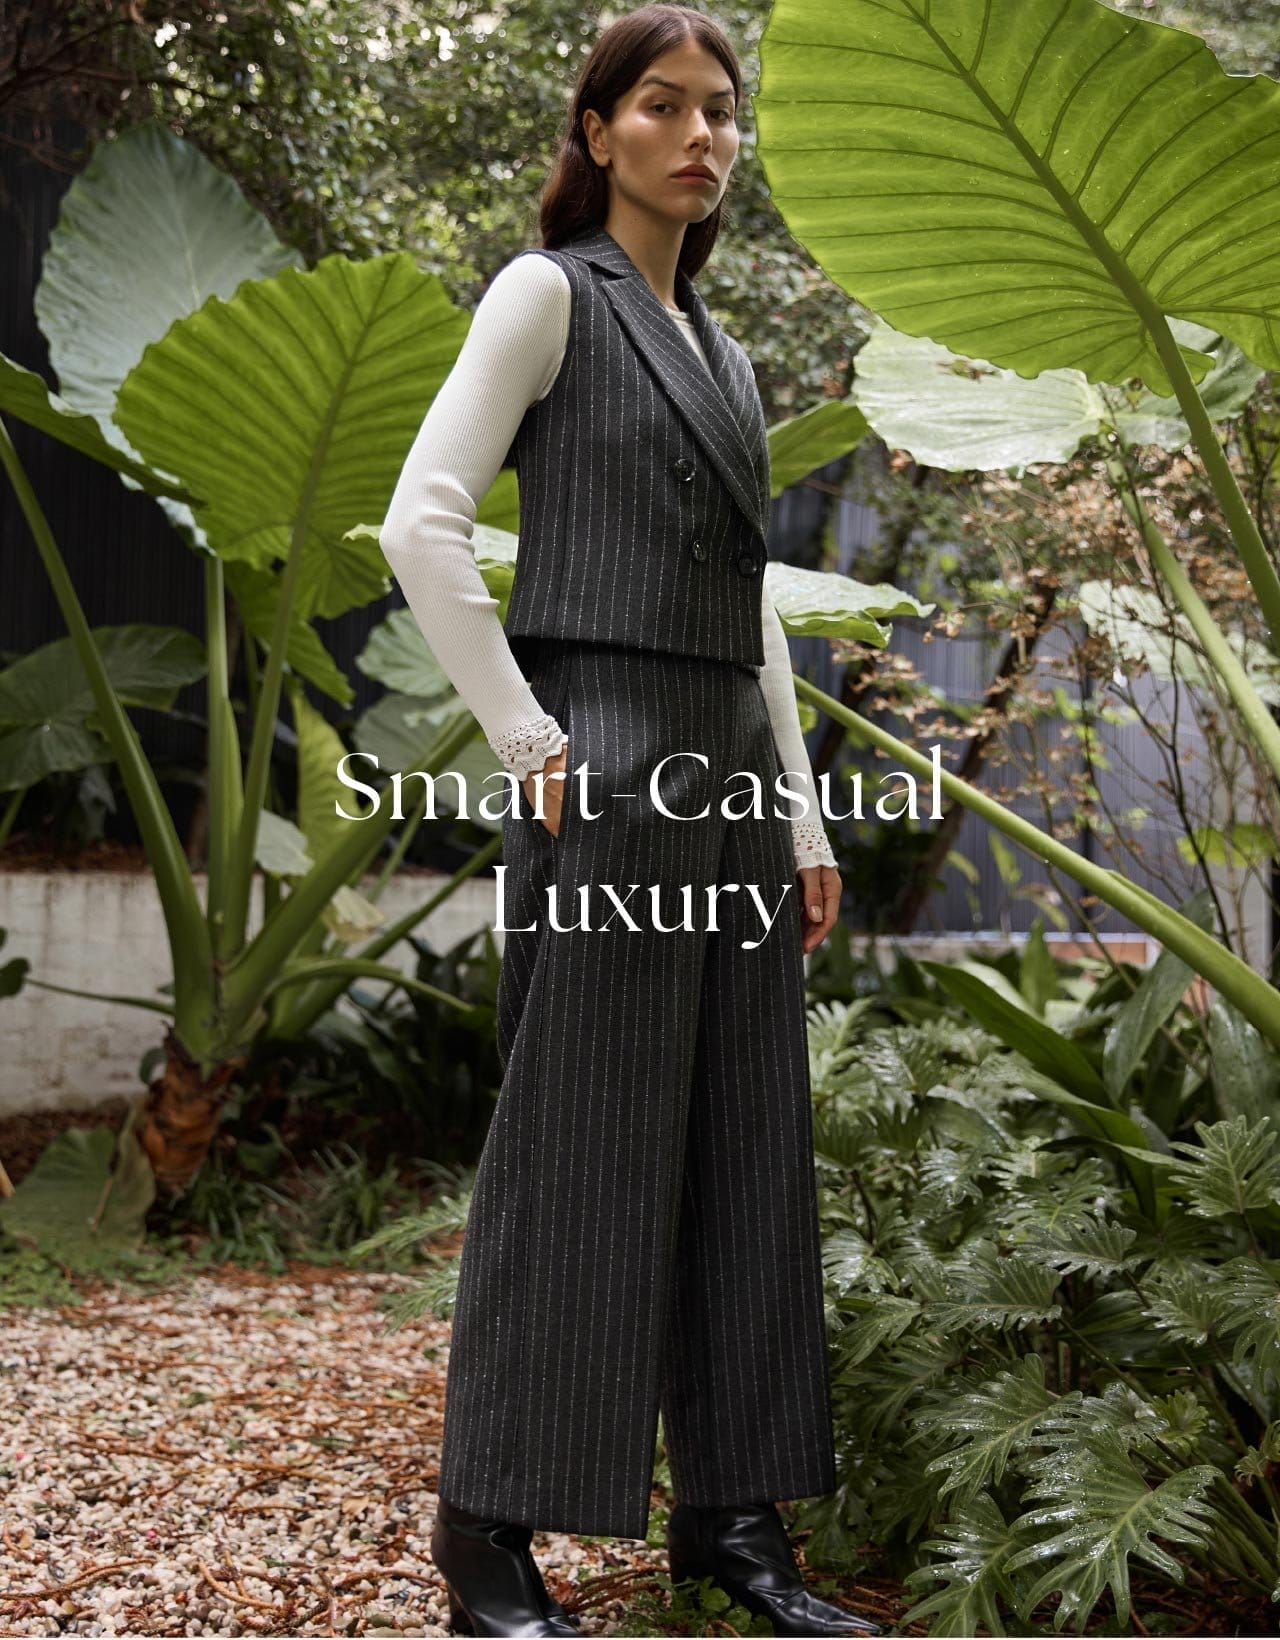 The model is wearing Wool Pinstripe Waist Coat layered with Long Sleeve Lace Trim Knit and paired with Wool Pinstripe Crop Pant